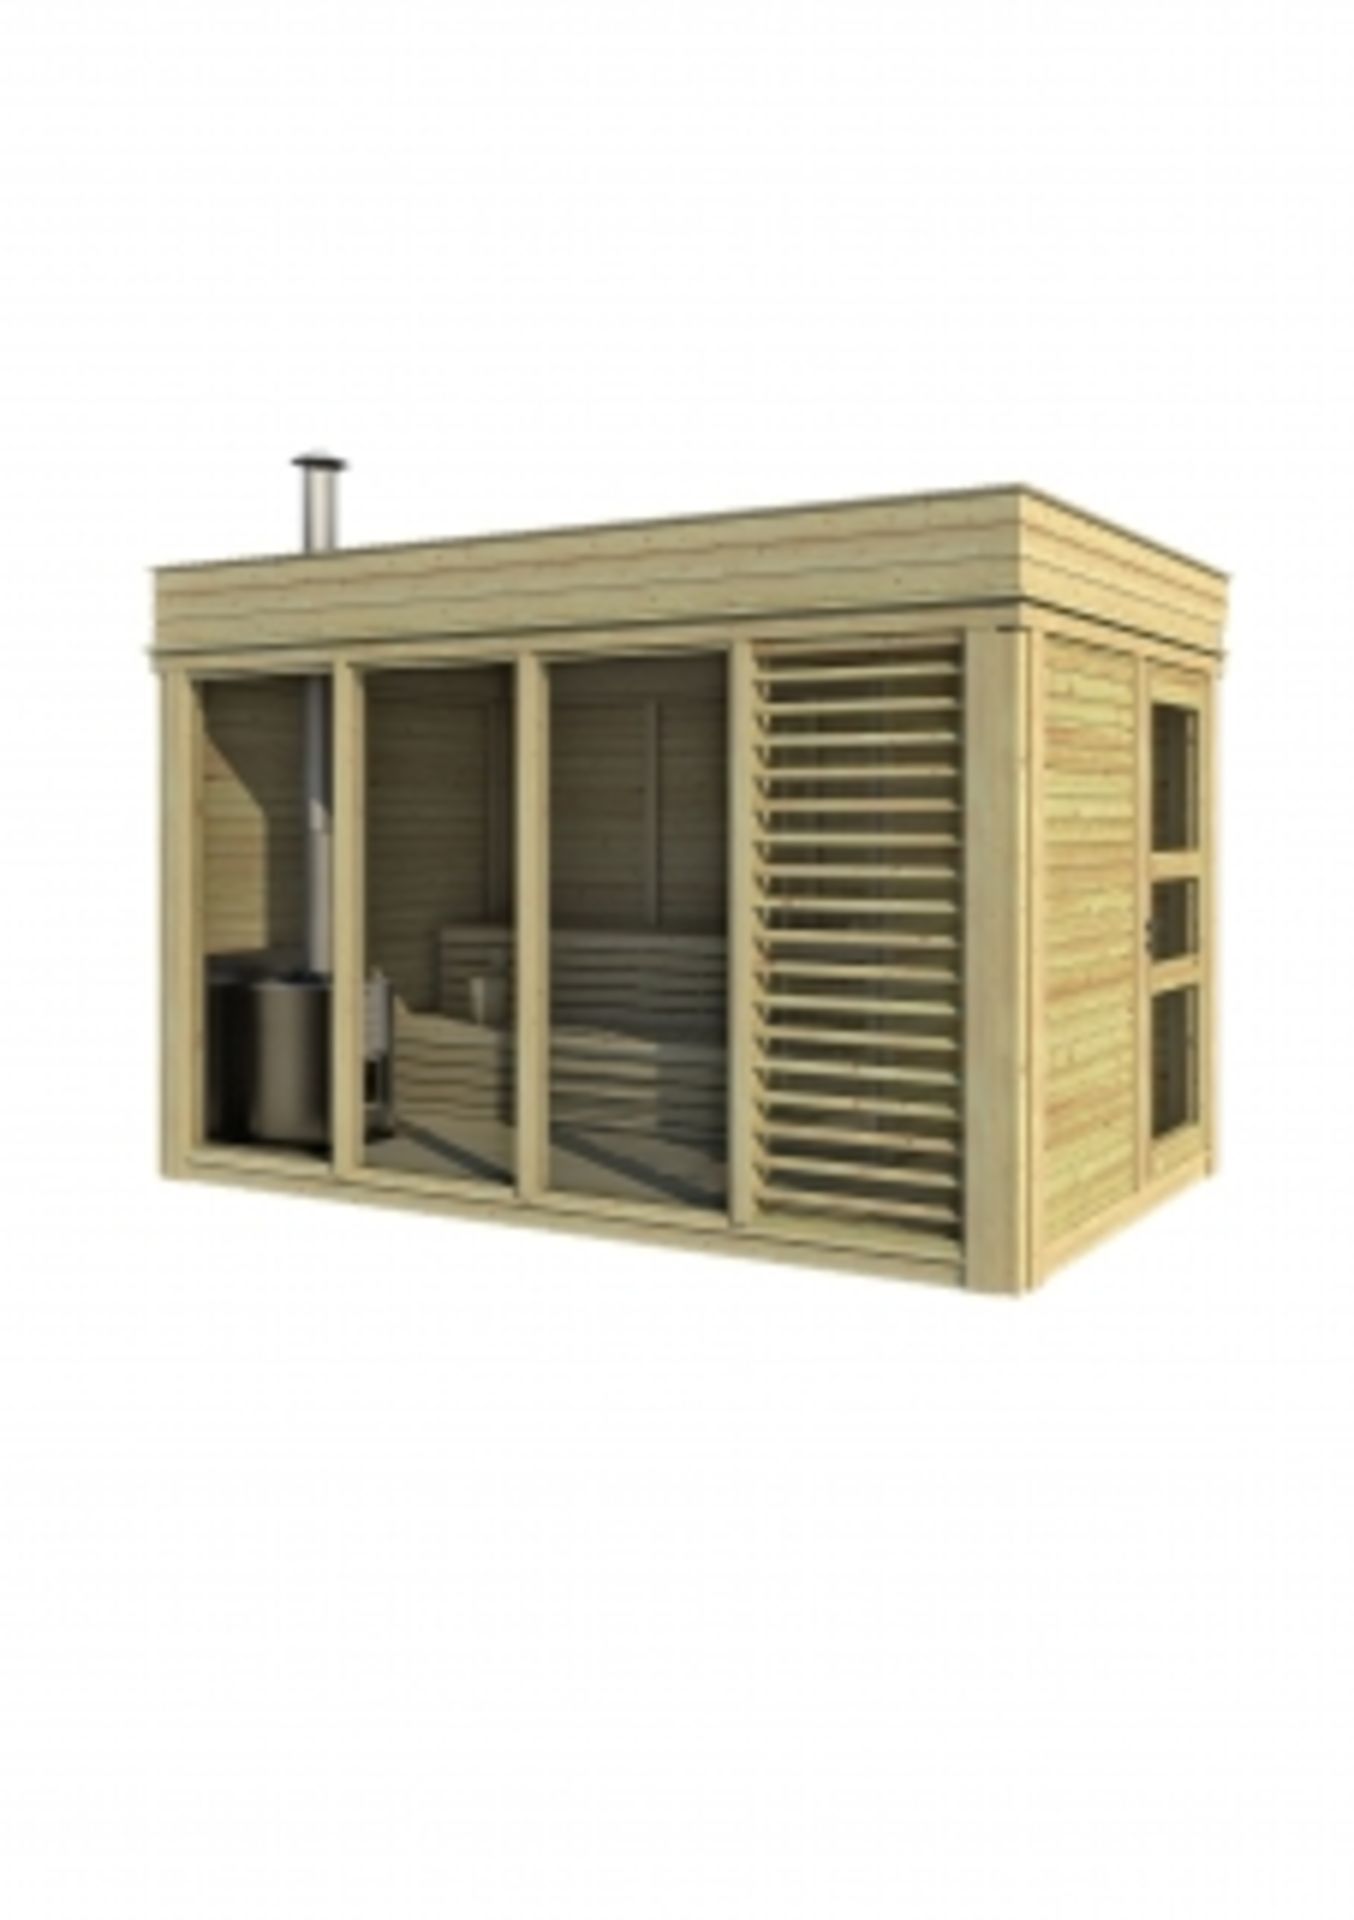 + VAT Brand New 2 x 4m Sauna Cube With Changing Room - Made From Spruce Wood - Roof Covered With